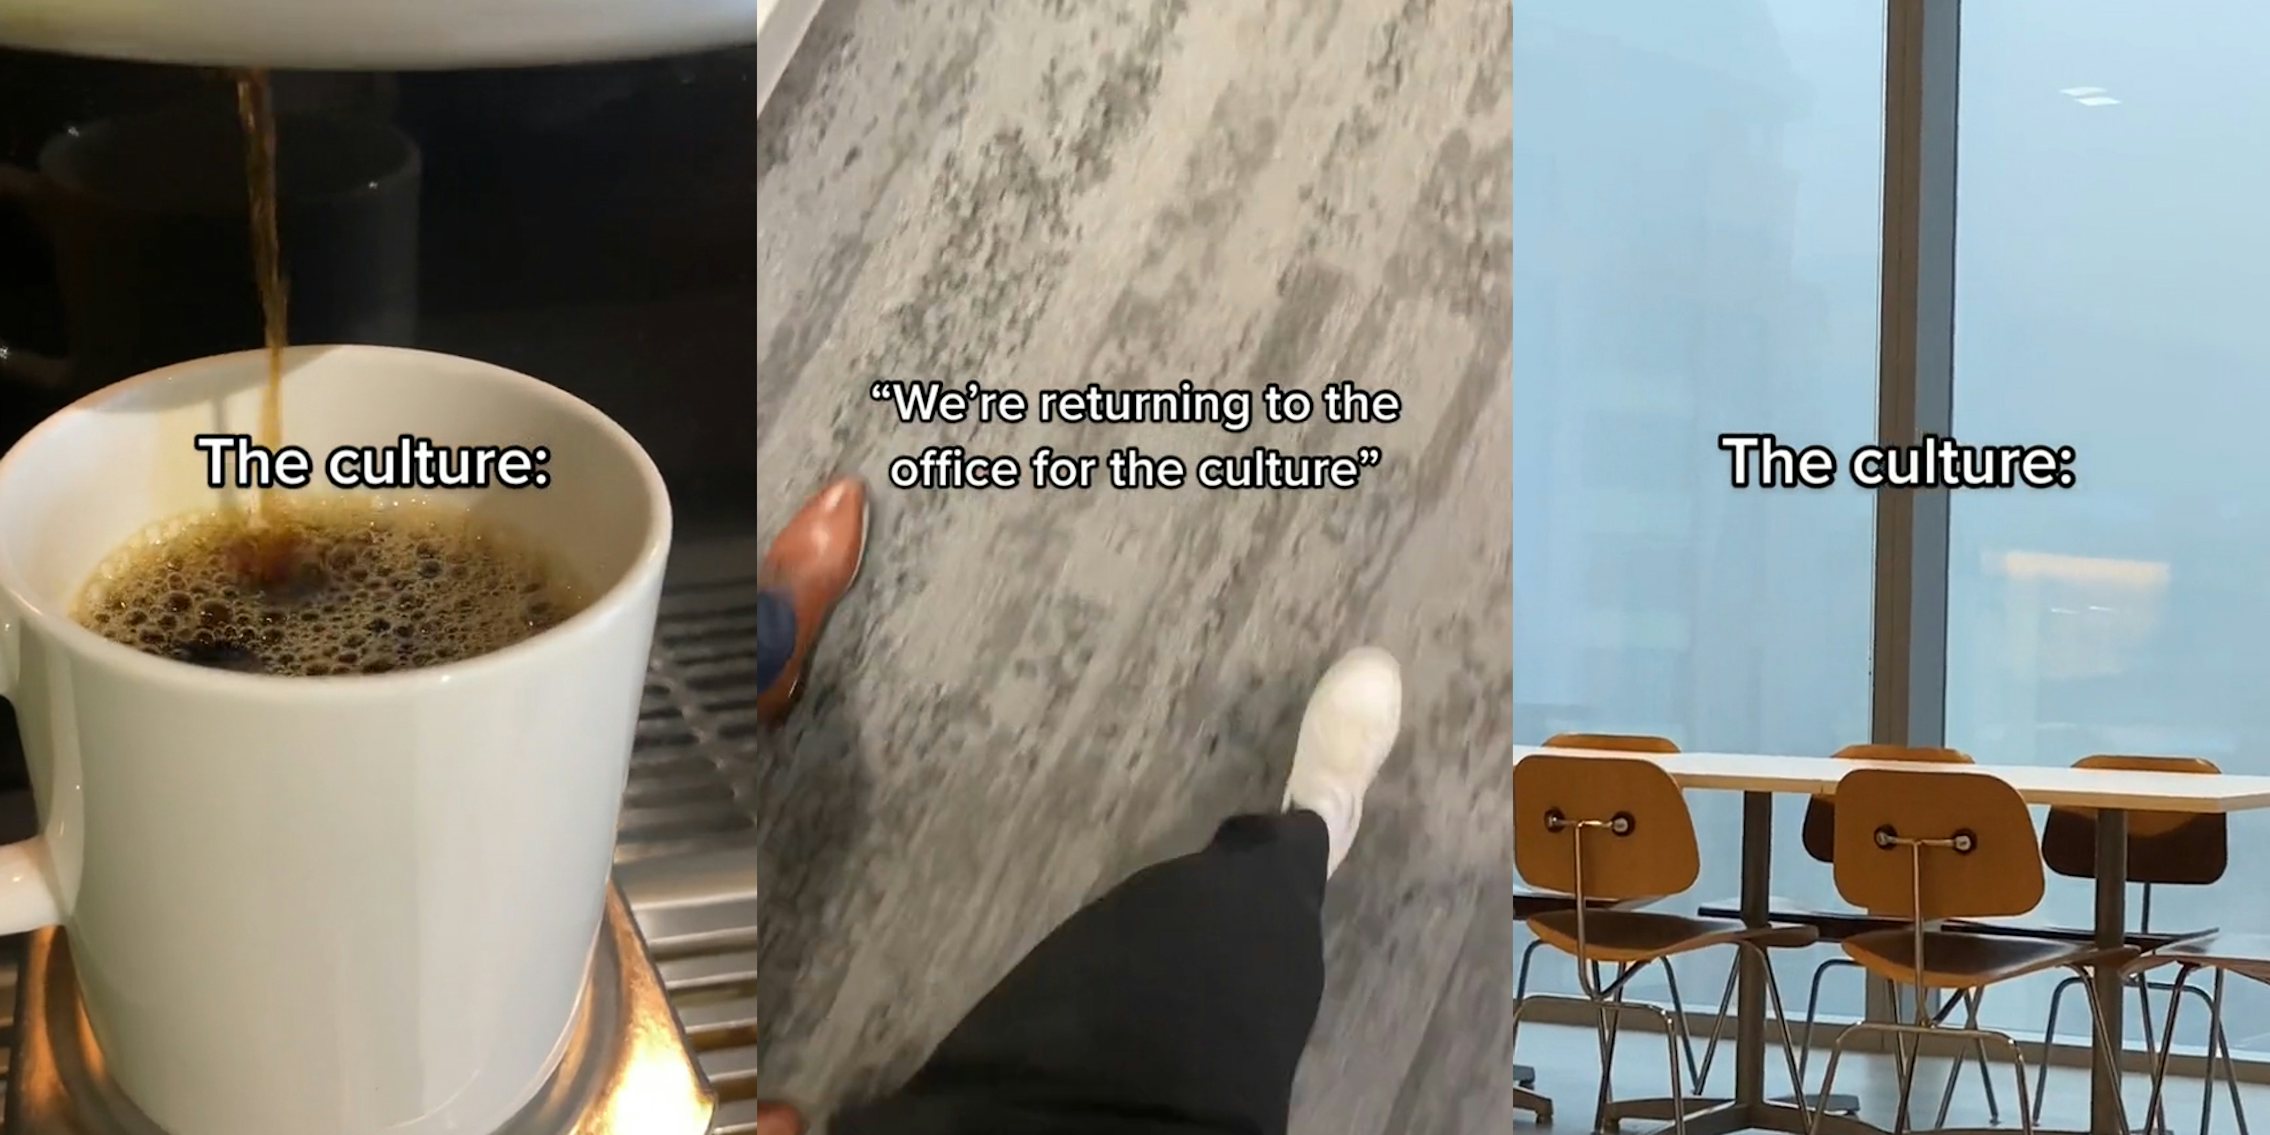 coffee machine pouring fresh coffee into mug with caption 'The culture:' (l) people walking on carpet with caption ''We're returning to the office for the culture'' (c) window with empty chairs and table and caption 'The culture:' (r)